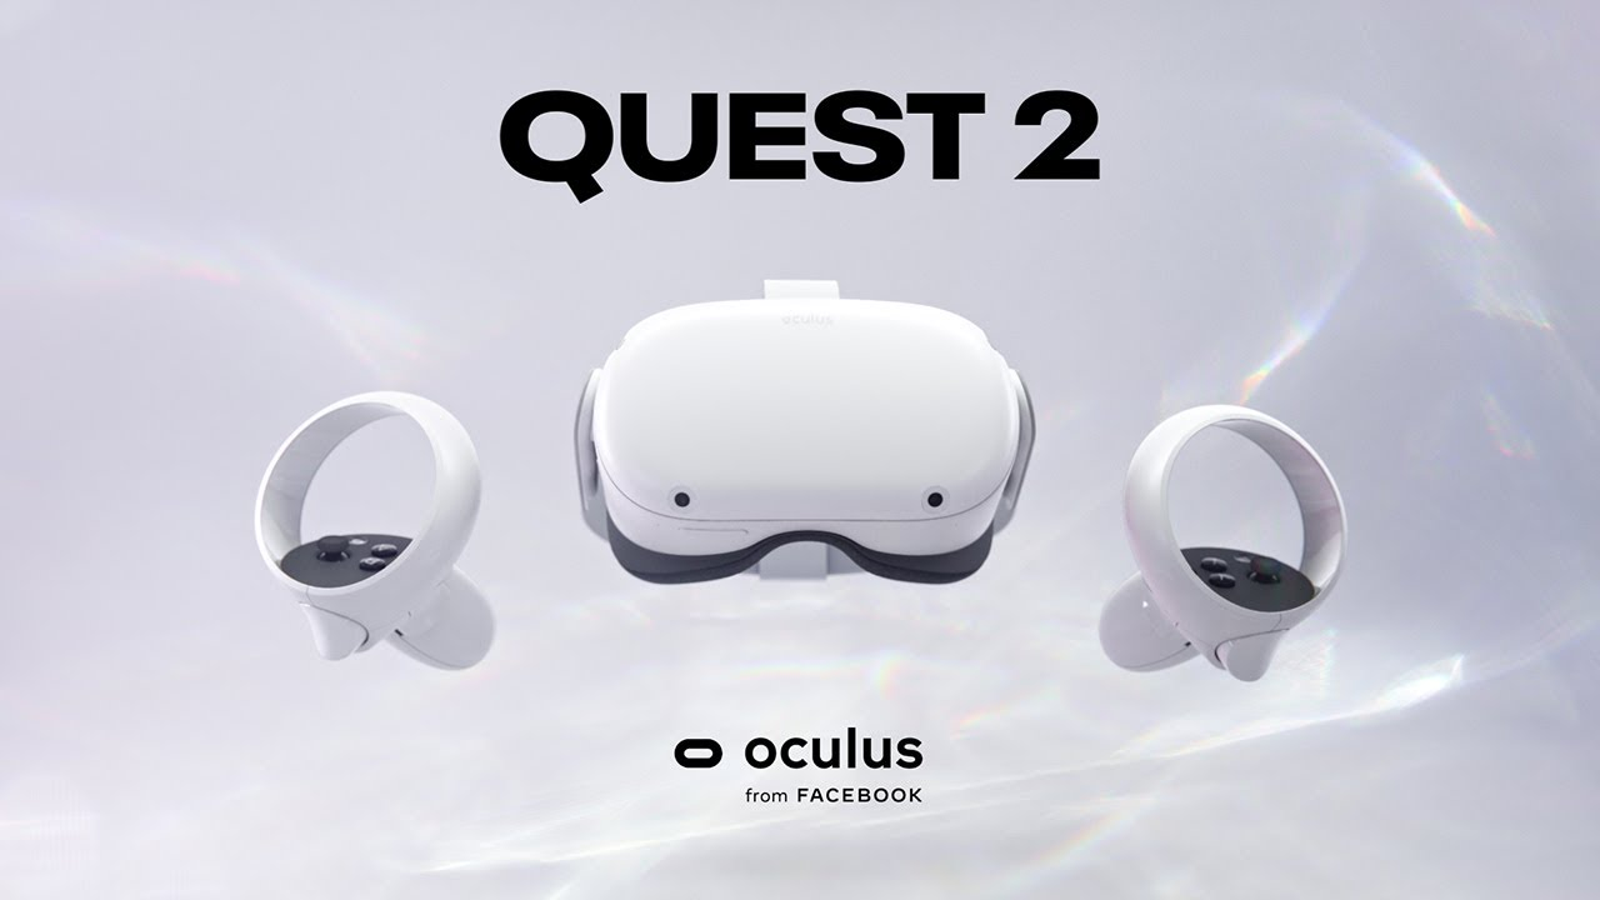 Meta increases the price of Meta Quest 2 VR headsets by $100